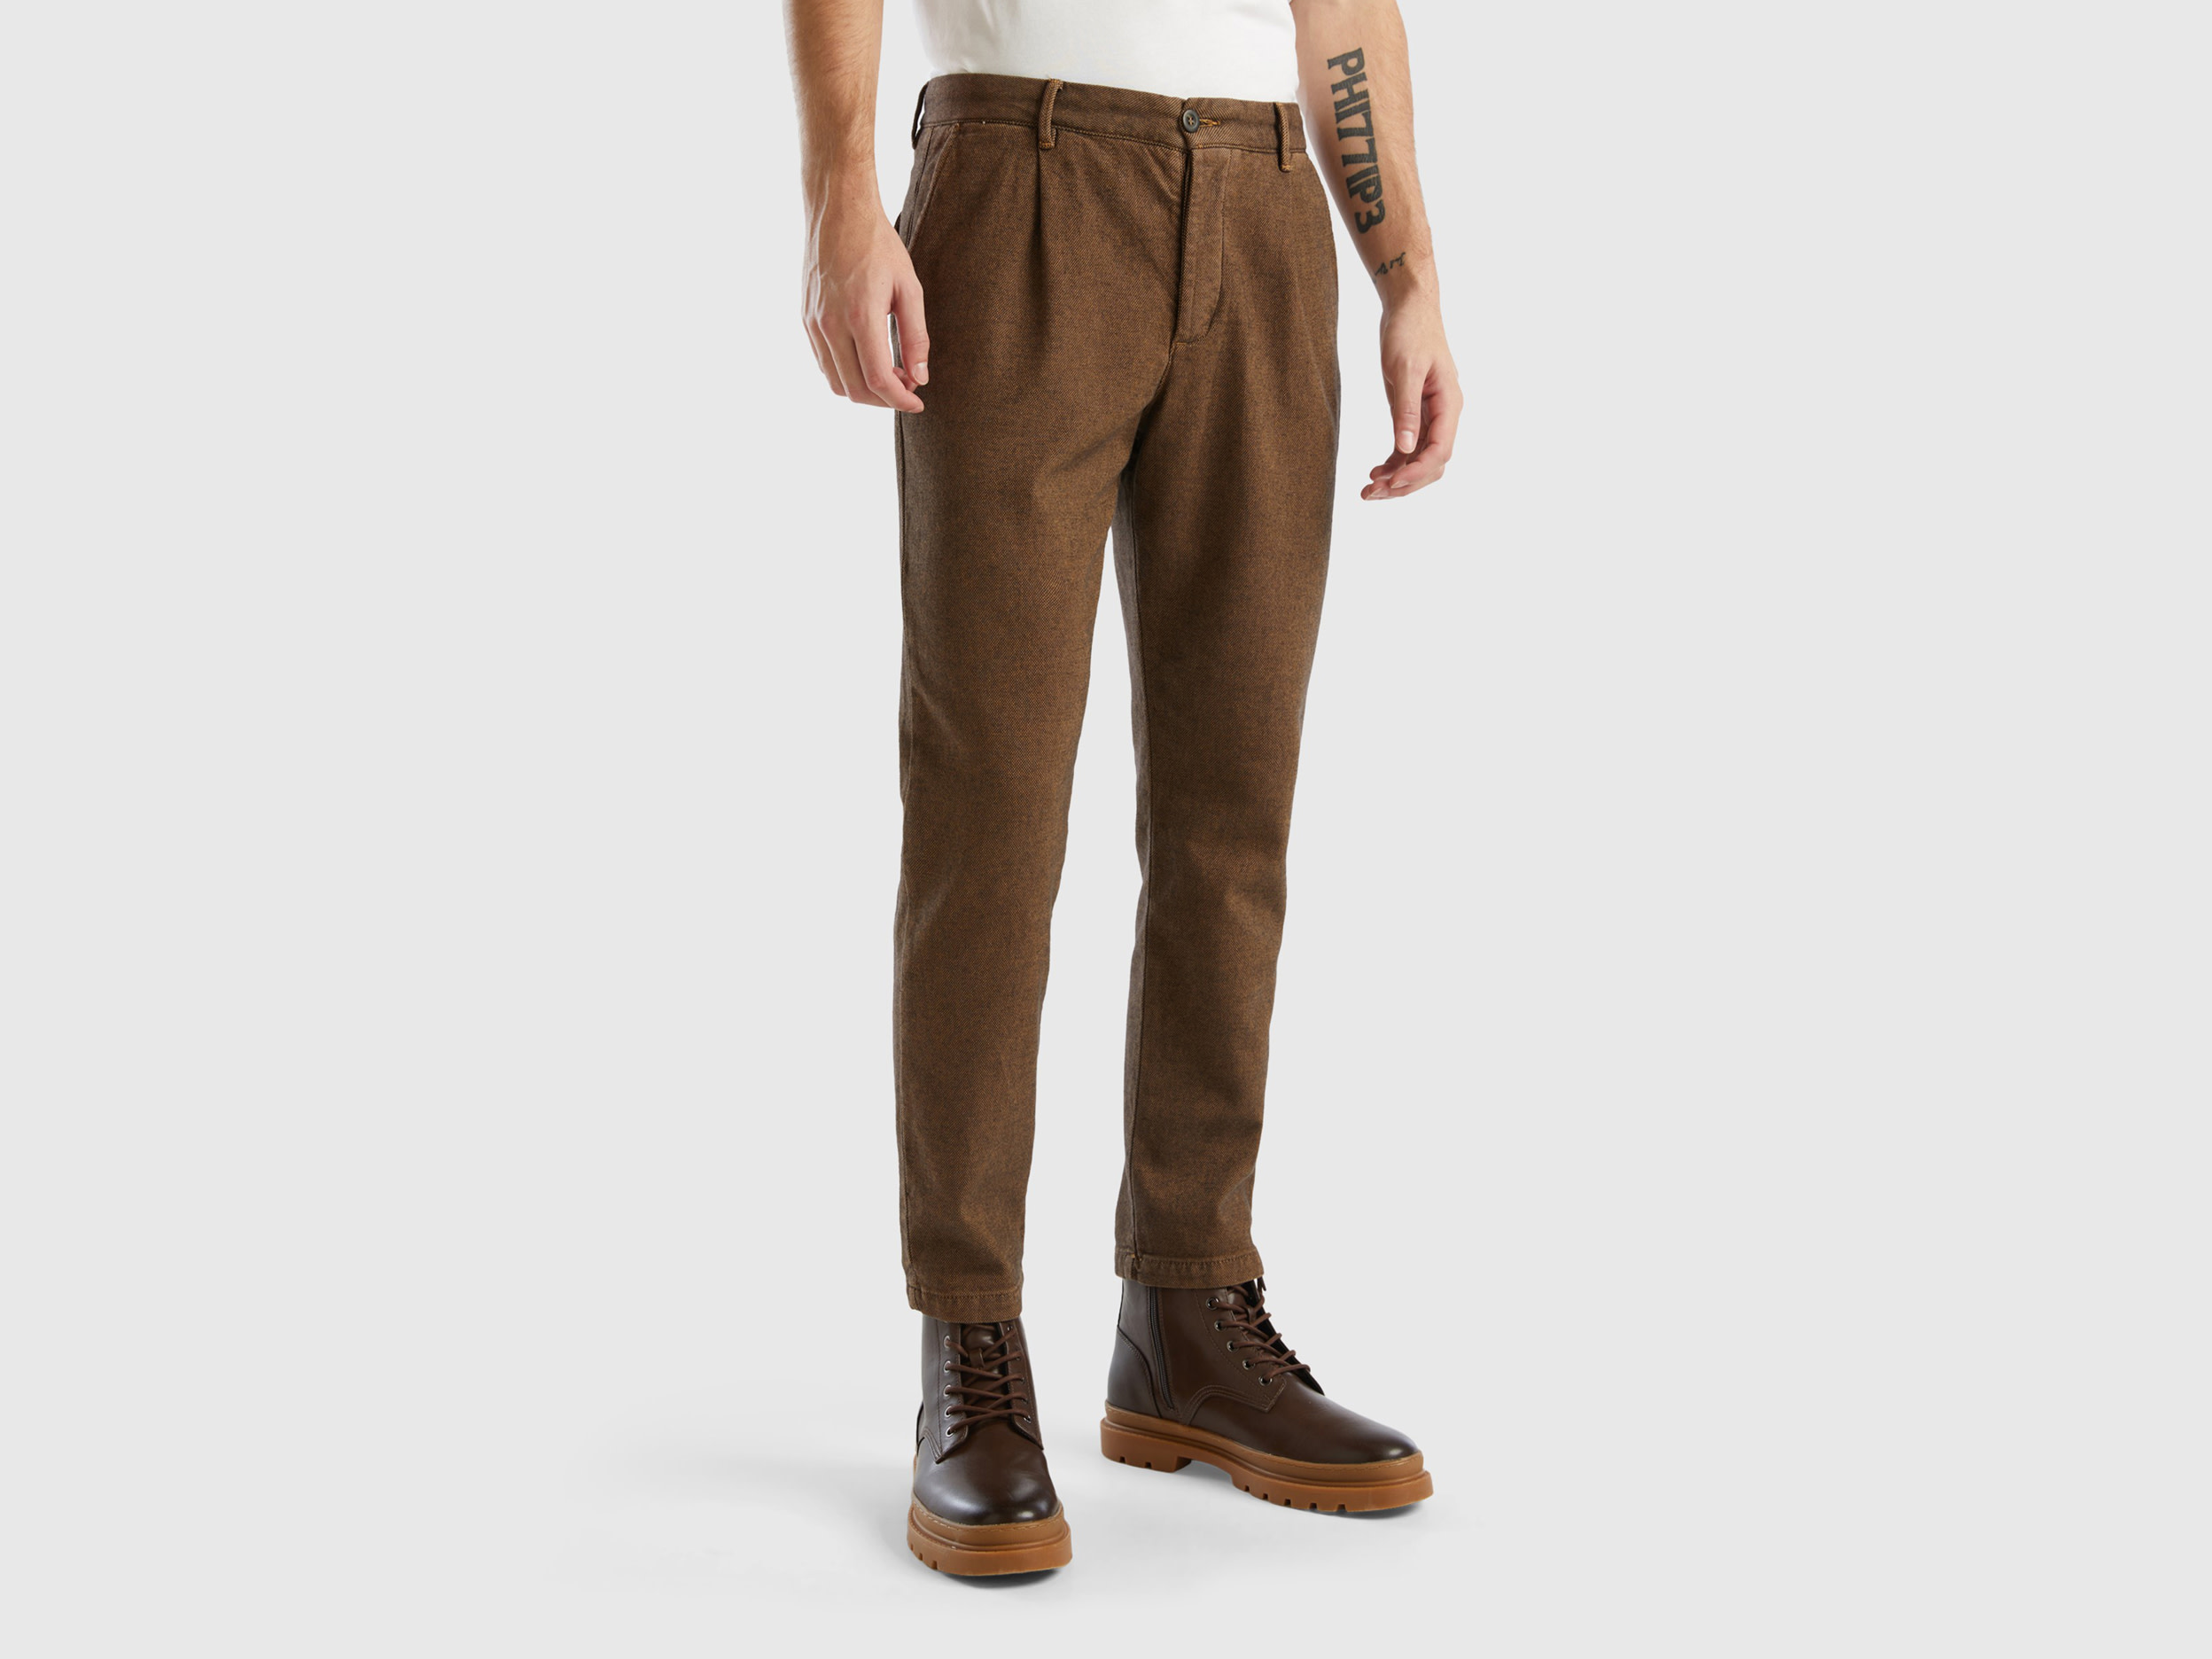 Benetton, Patterned Slim Fit Chinos, size 36, Brown, Men